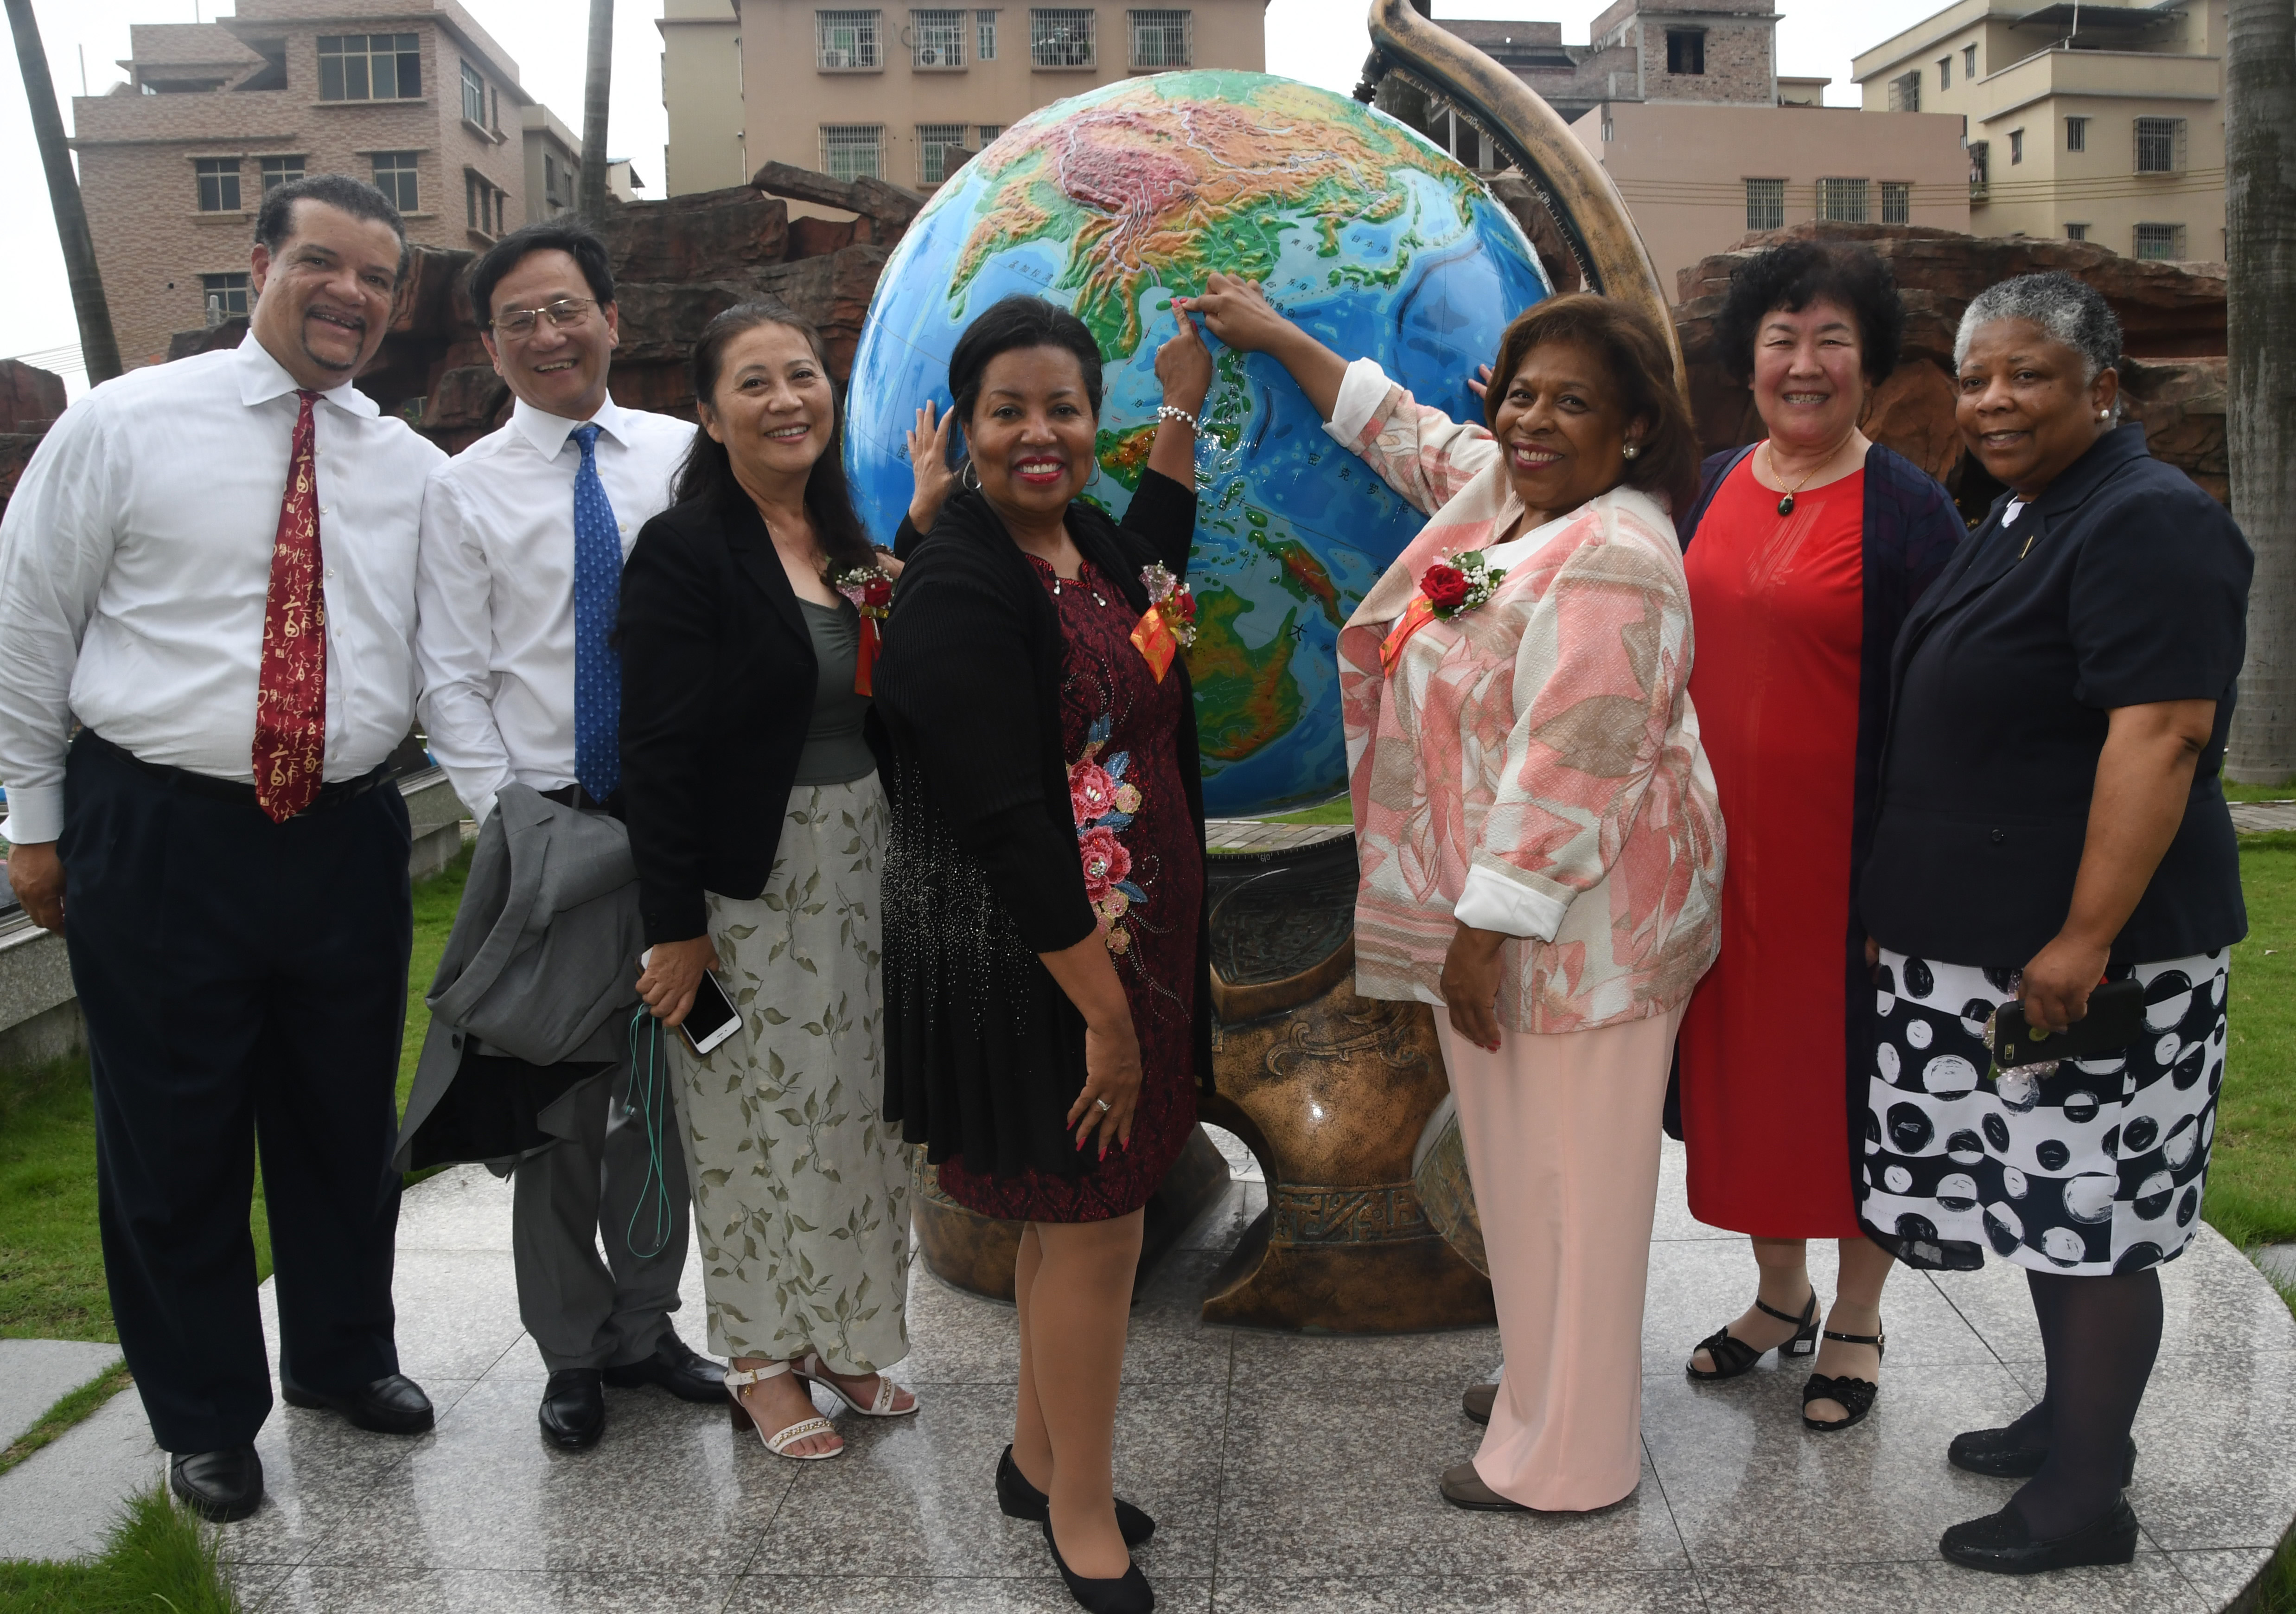 From left are the Rev. Ken Anderson; Lv Zhong, Boya general manager; Hon Hong, chairwoman of the Boya International Education Group; Dr. Devona Williams; Dr. Wilma Mishoe; Li Mingzhen; and the Rev. Rita Paige.